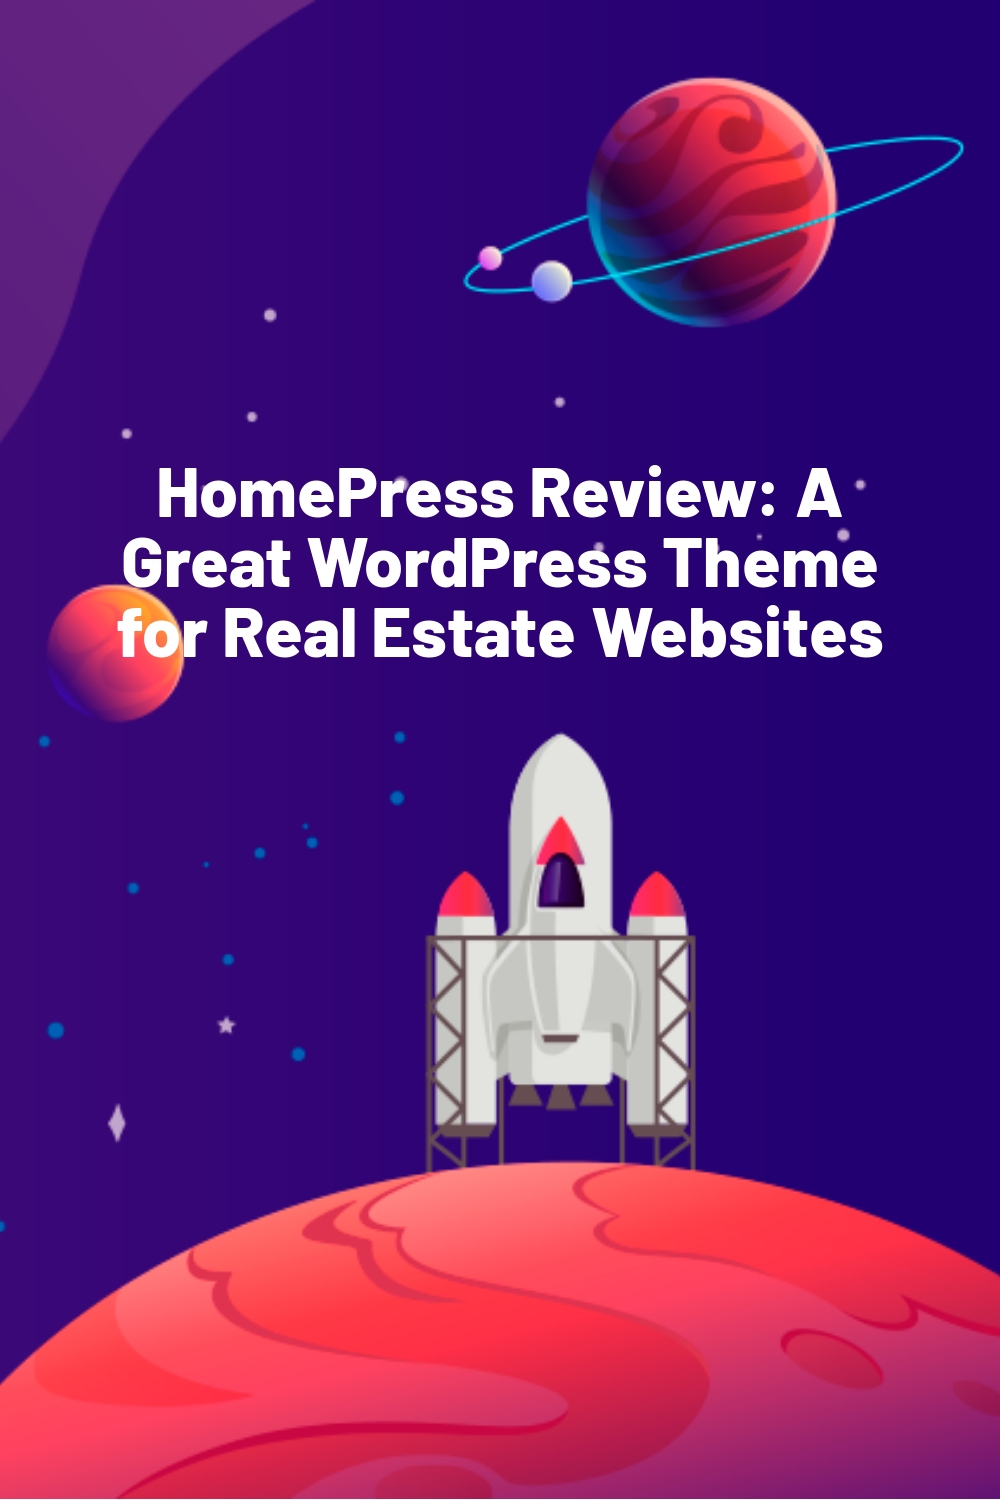 HomePress Review: A Great WordPress Theme for Real Estate Websites